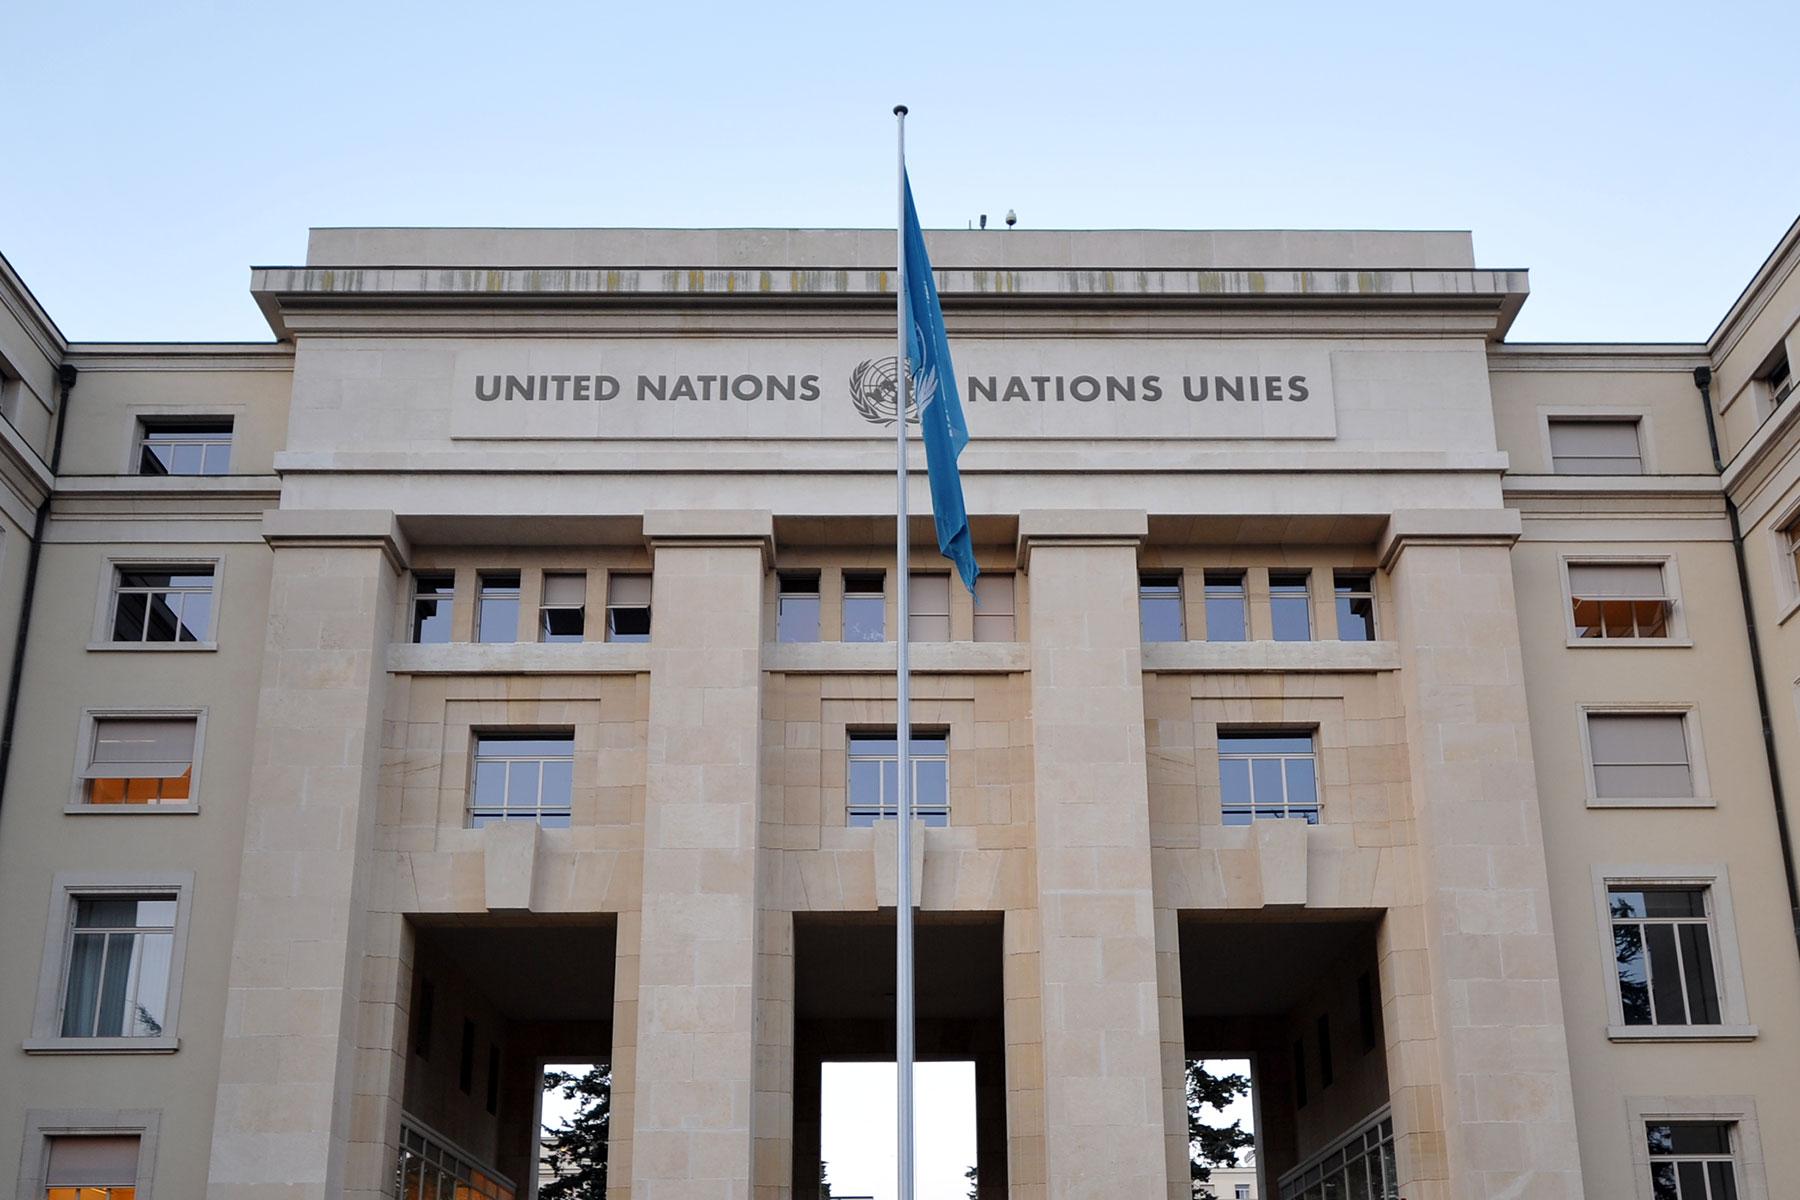 The Palais des Nations in Geneva, where the Human Rights Council meets. Because of sanitary measures, the webinar took place online. Photo: LWF/C. KÃ¤stner 